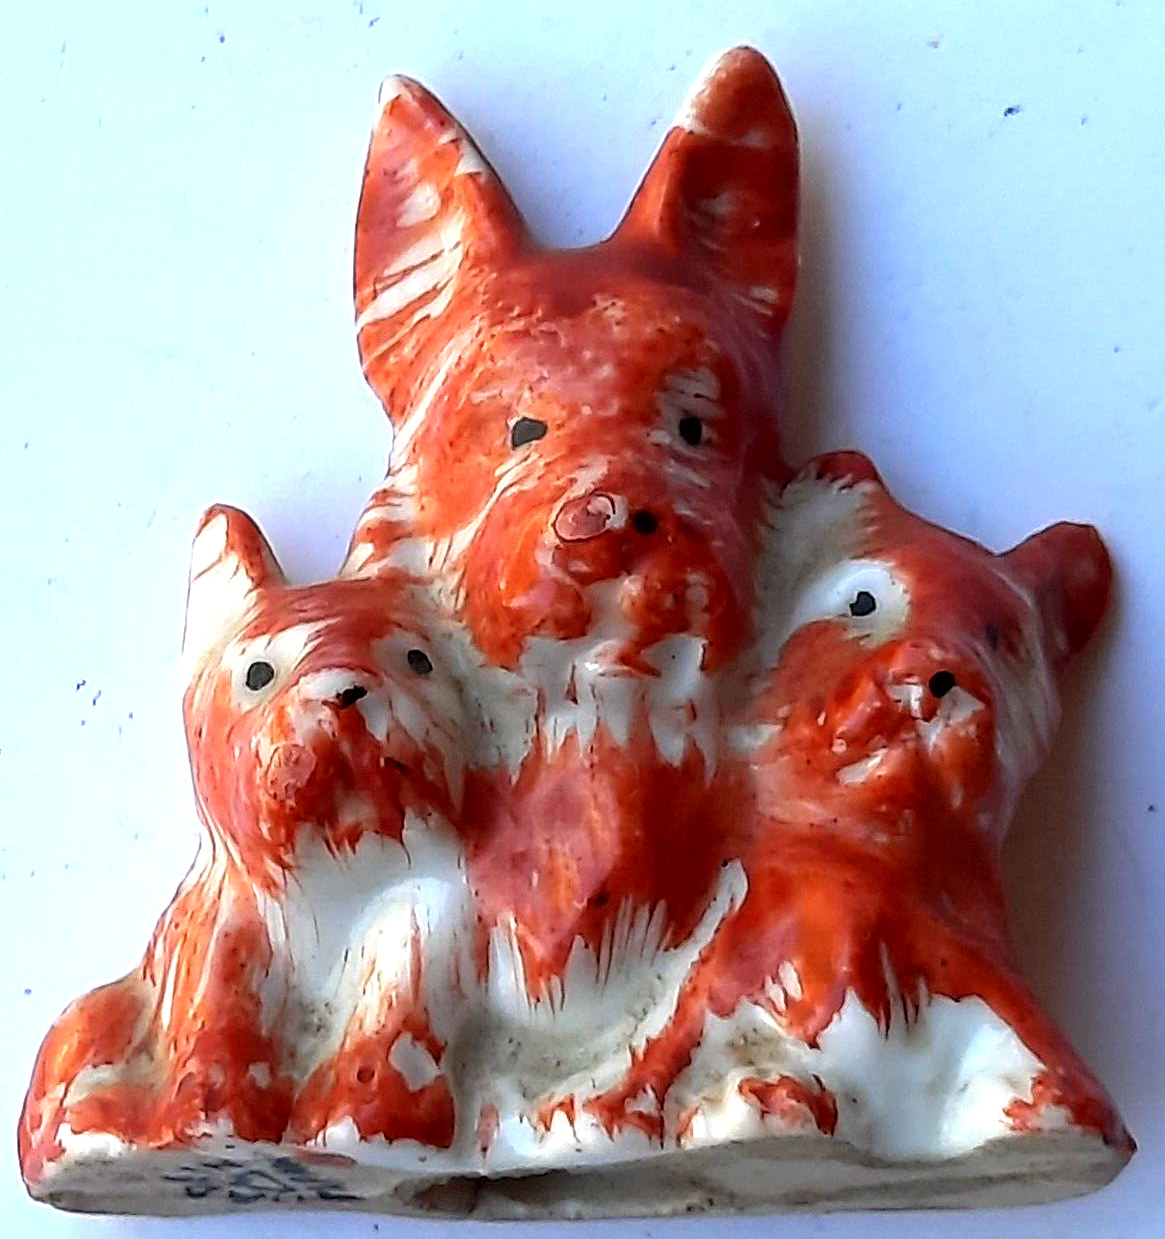 Vintage porcelain dogs figurine Made In Japan   2 x 2 1/4 x 3/4 inches